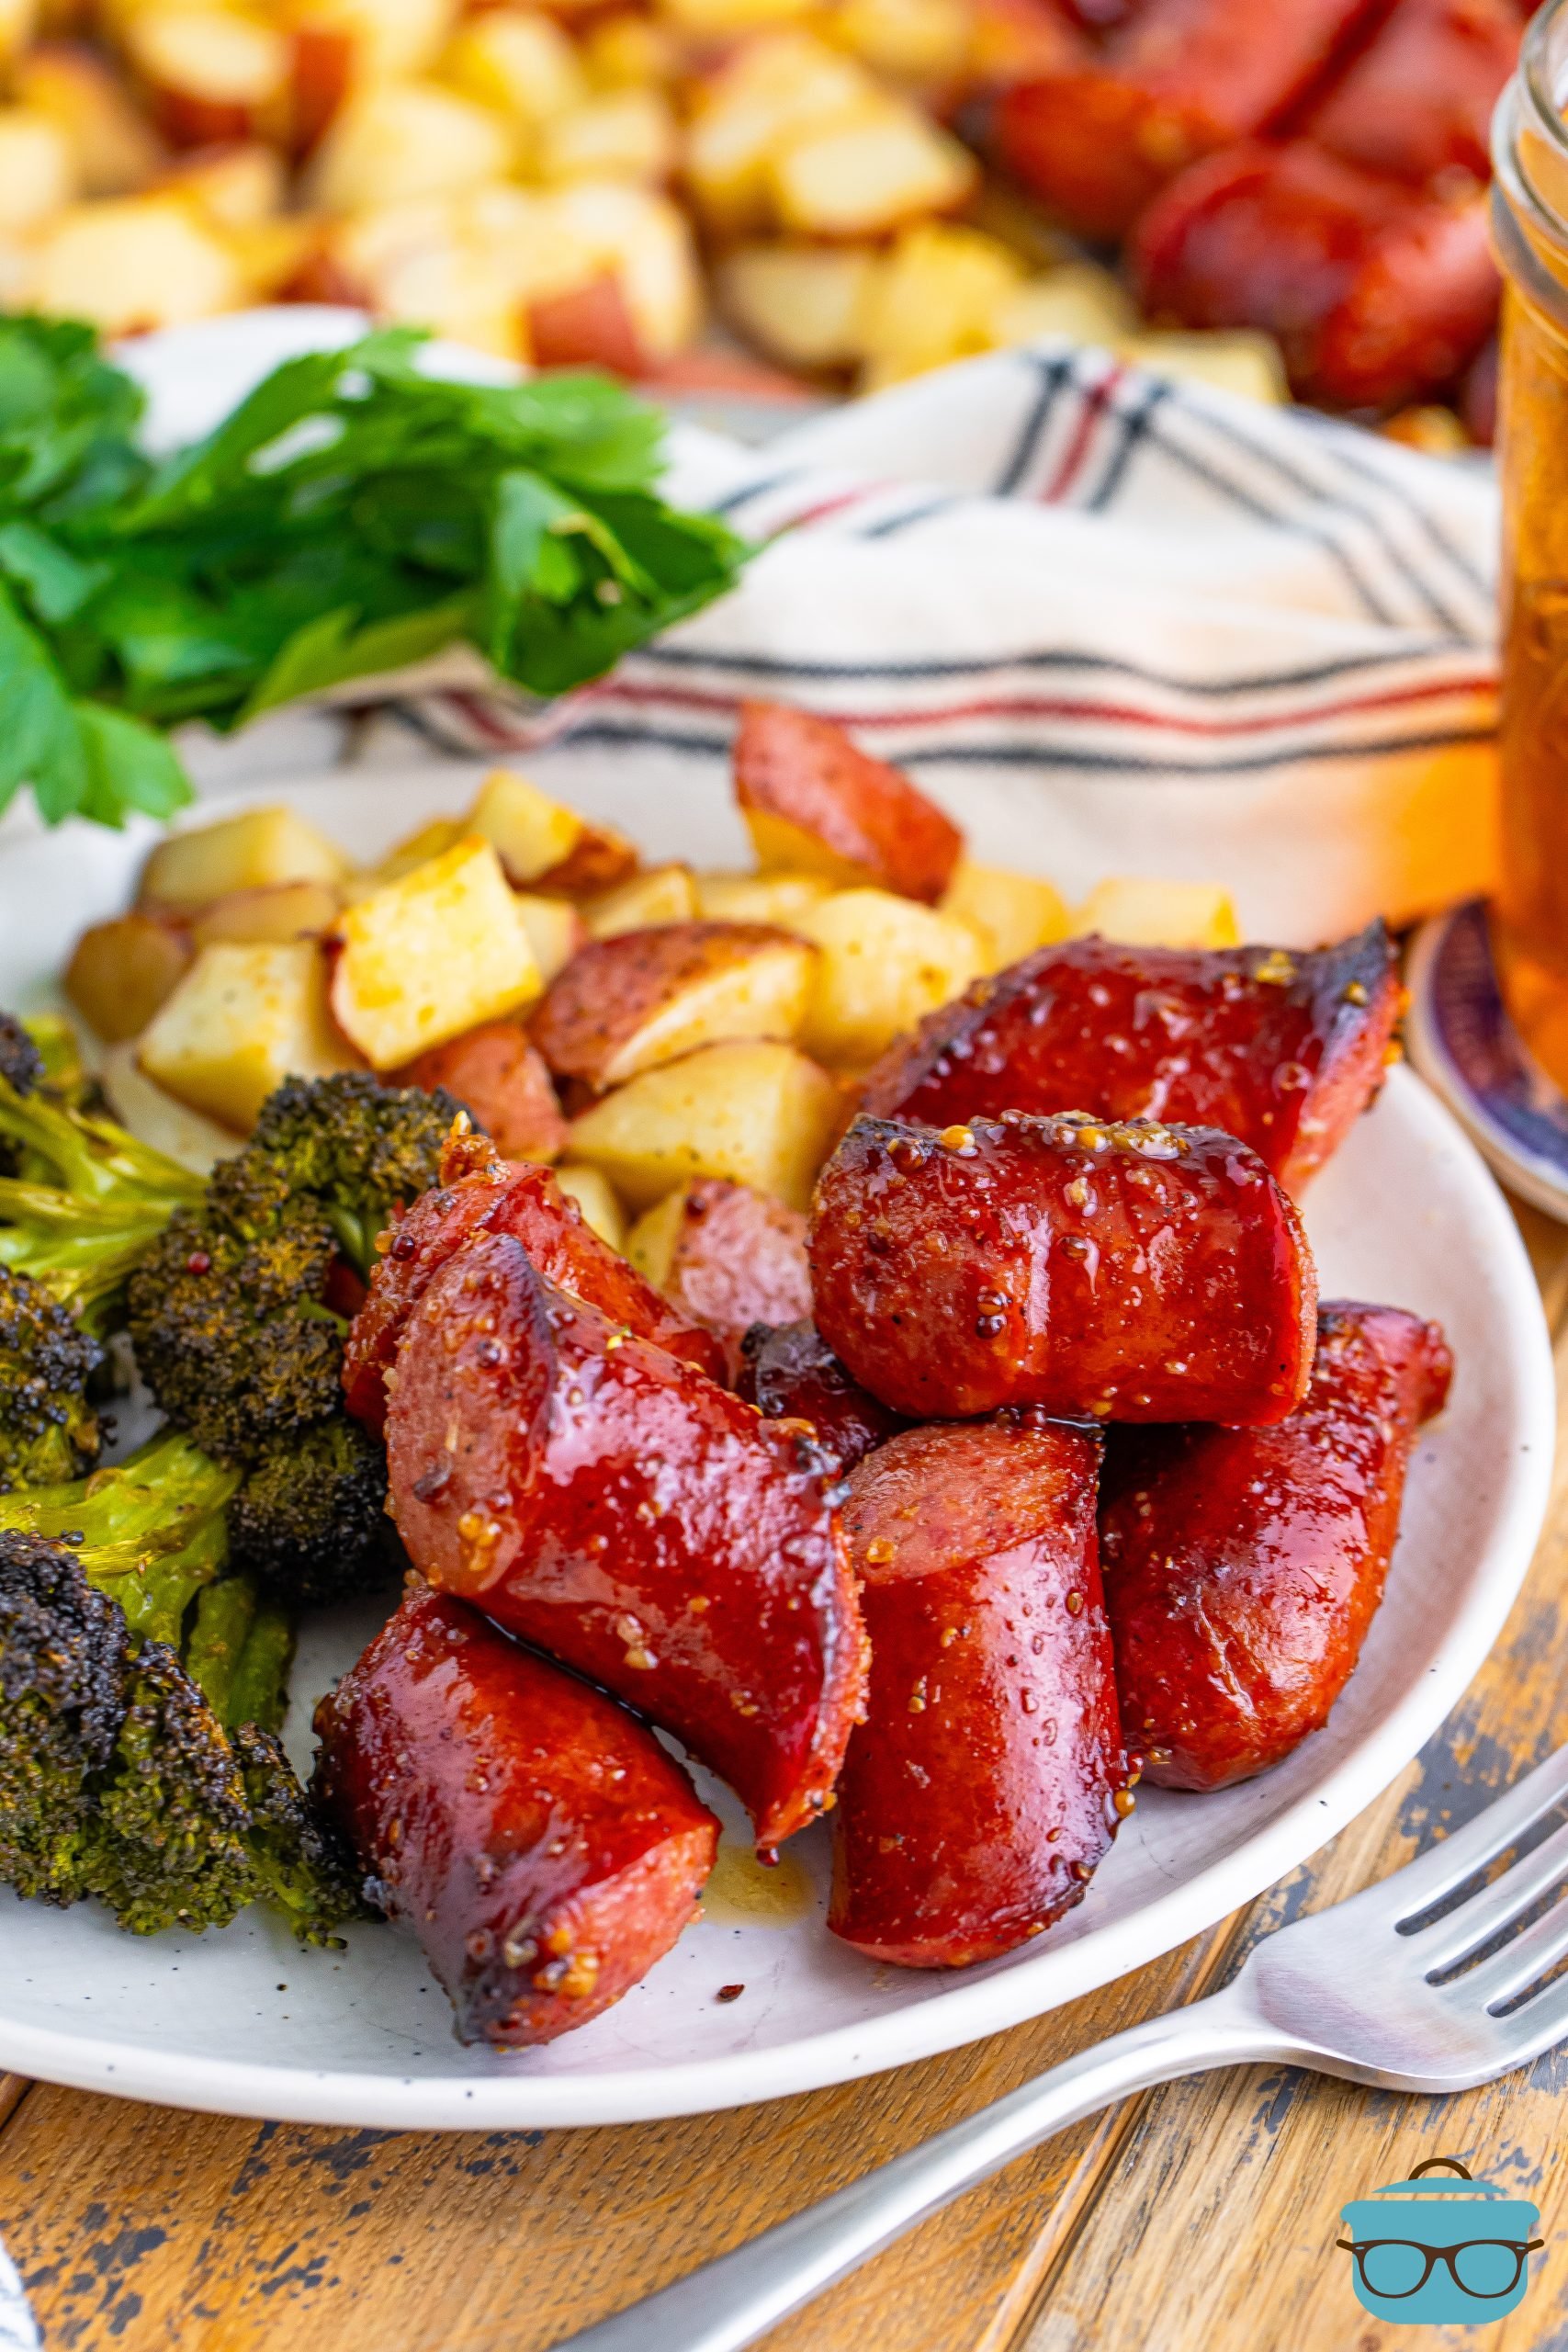 A plate with Kielbasa and sides on it.